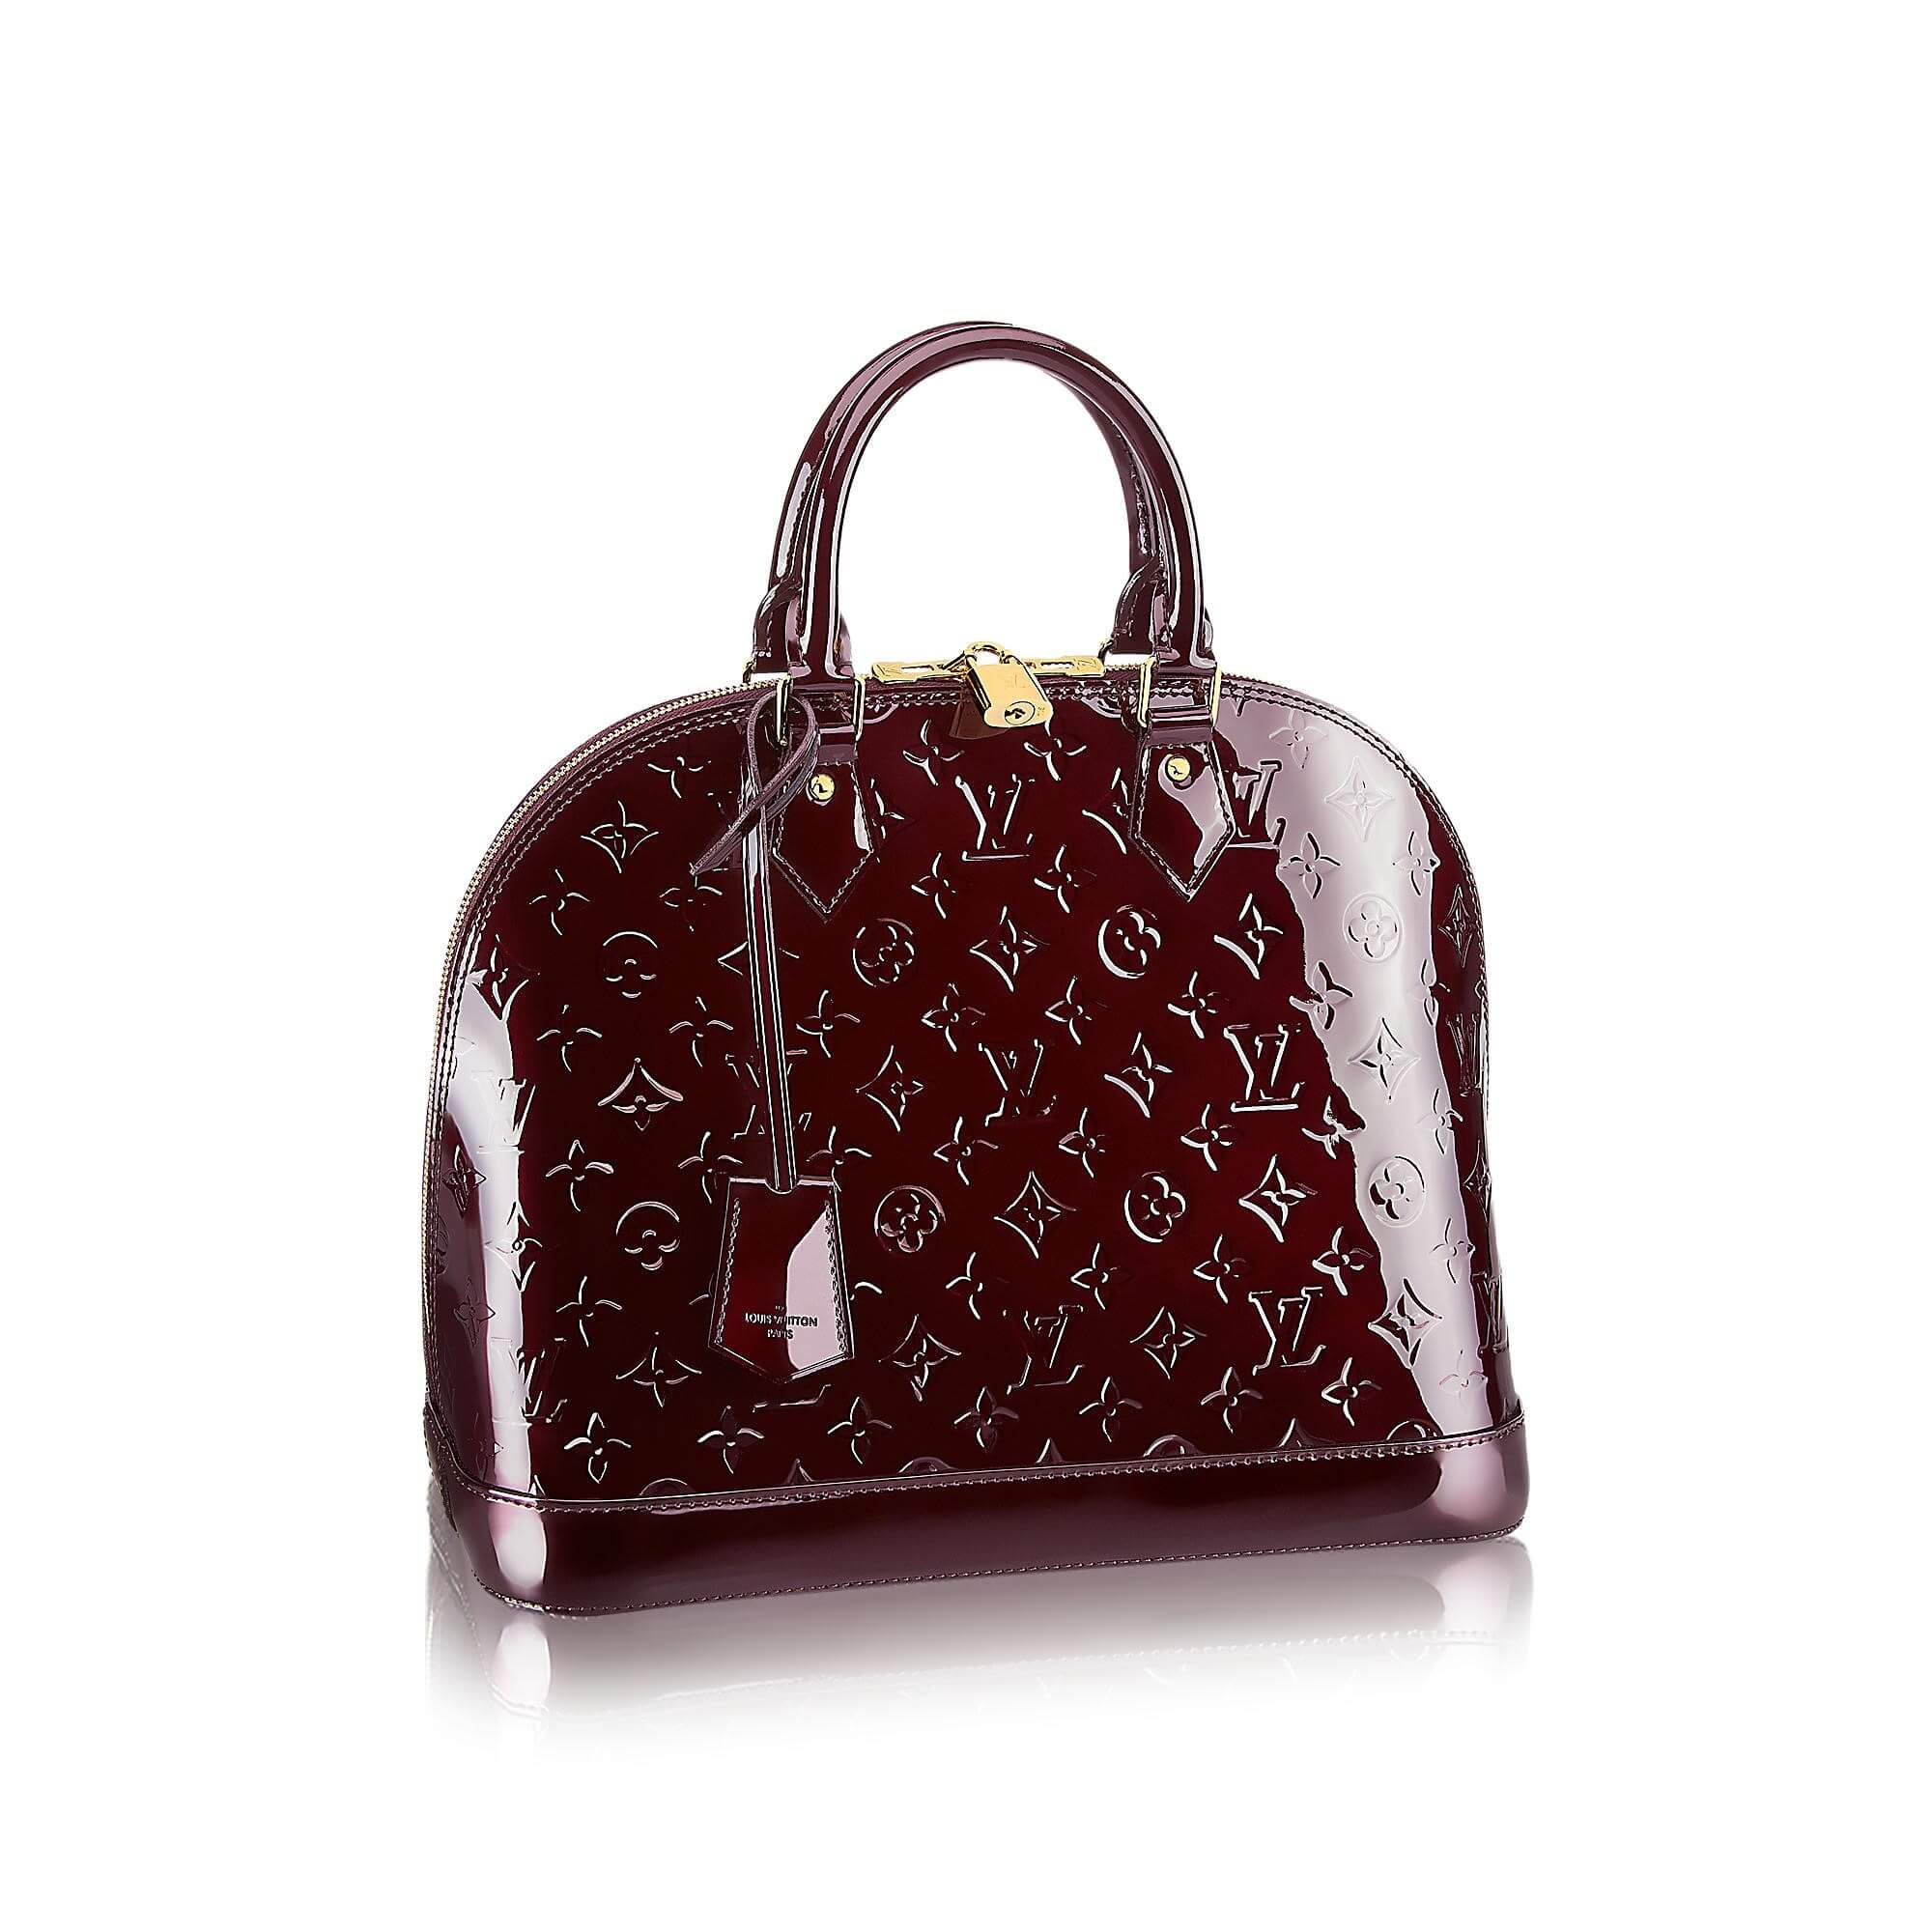 The Most Iconic Louis Vuitton Bags With The Best Stories!